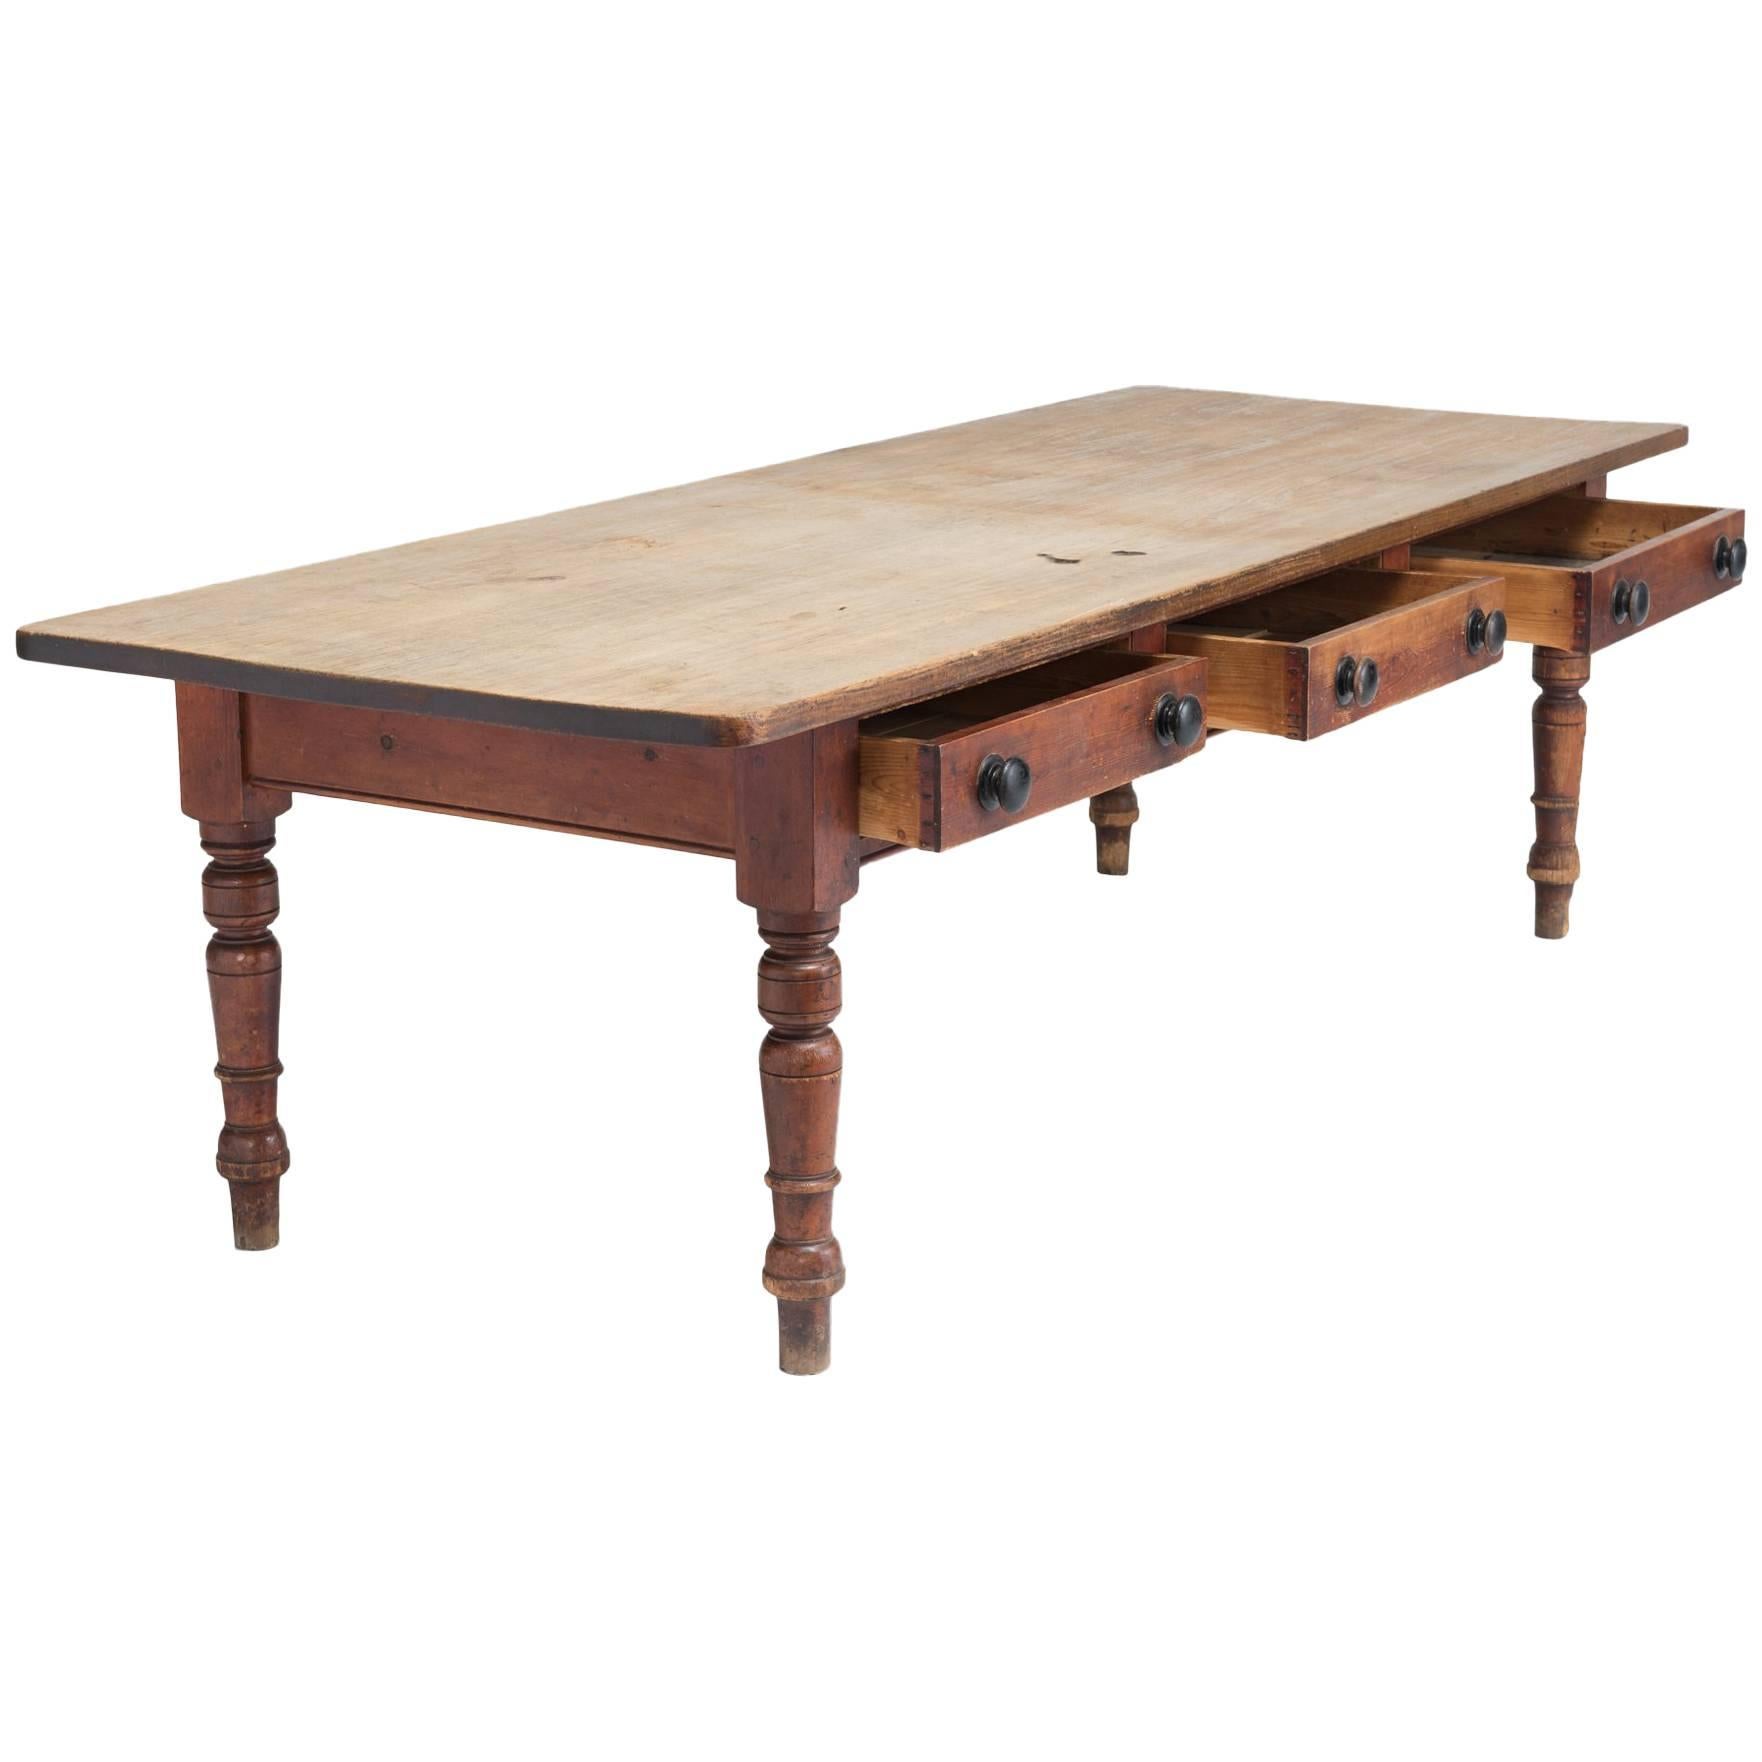 Farmhouse Table, England, circa 1940

Beautifully patinated table top on a base that includes three large drawers and turned legs.